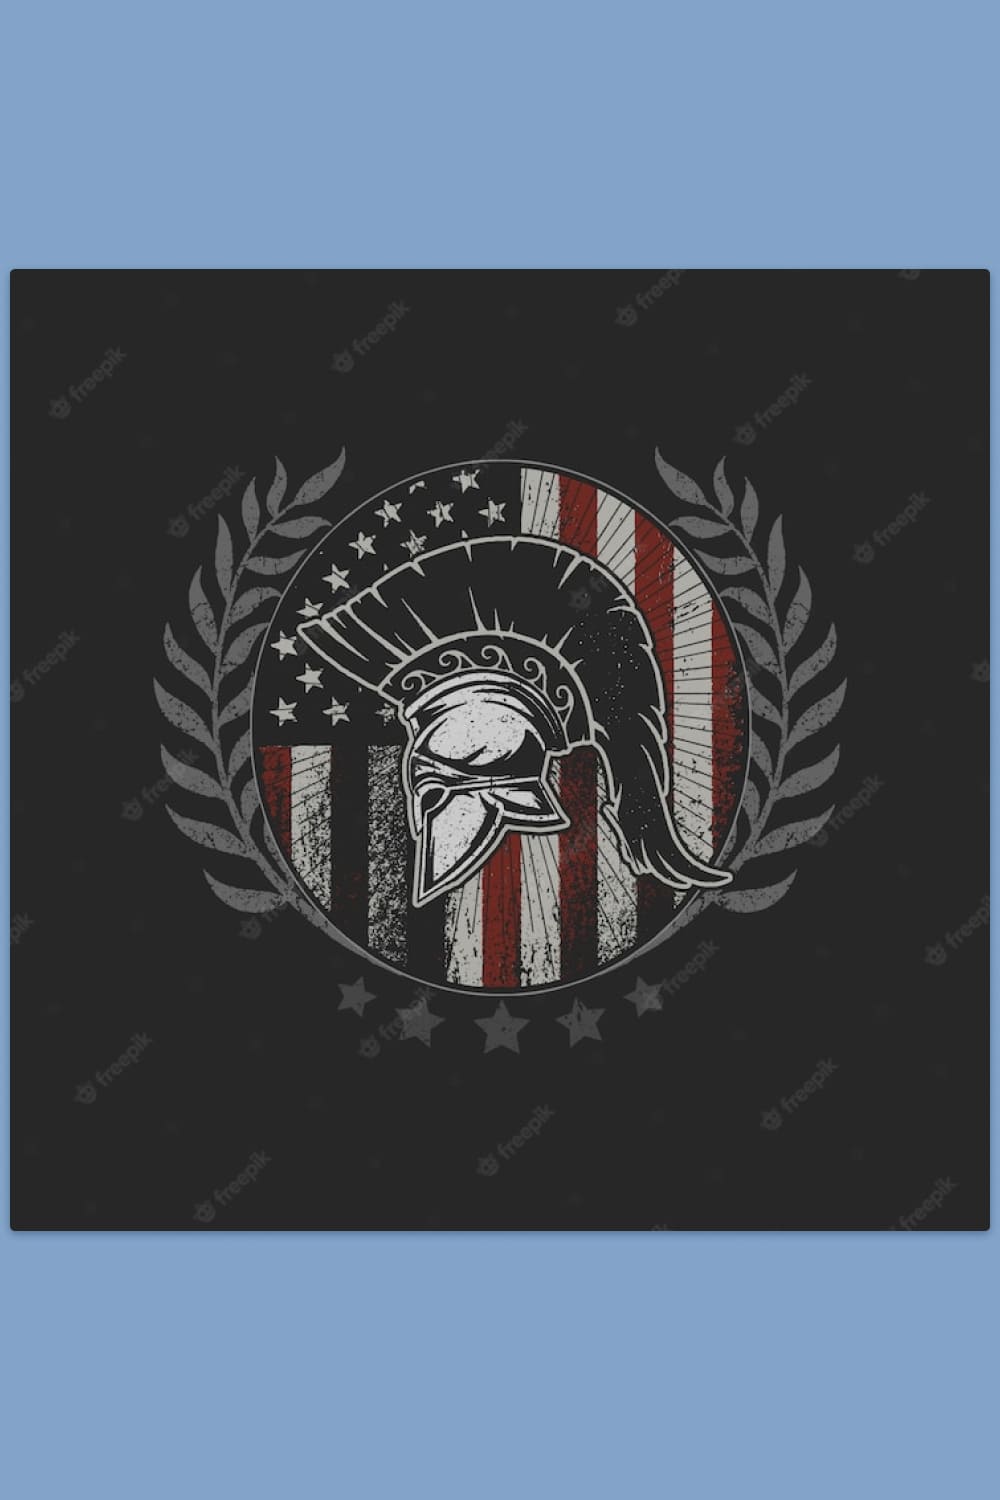 Spartan helmet on the background of the American flag.